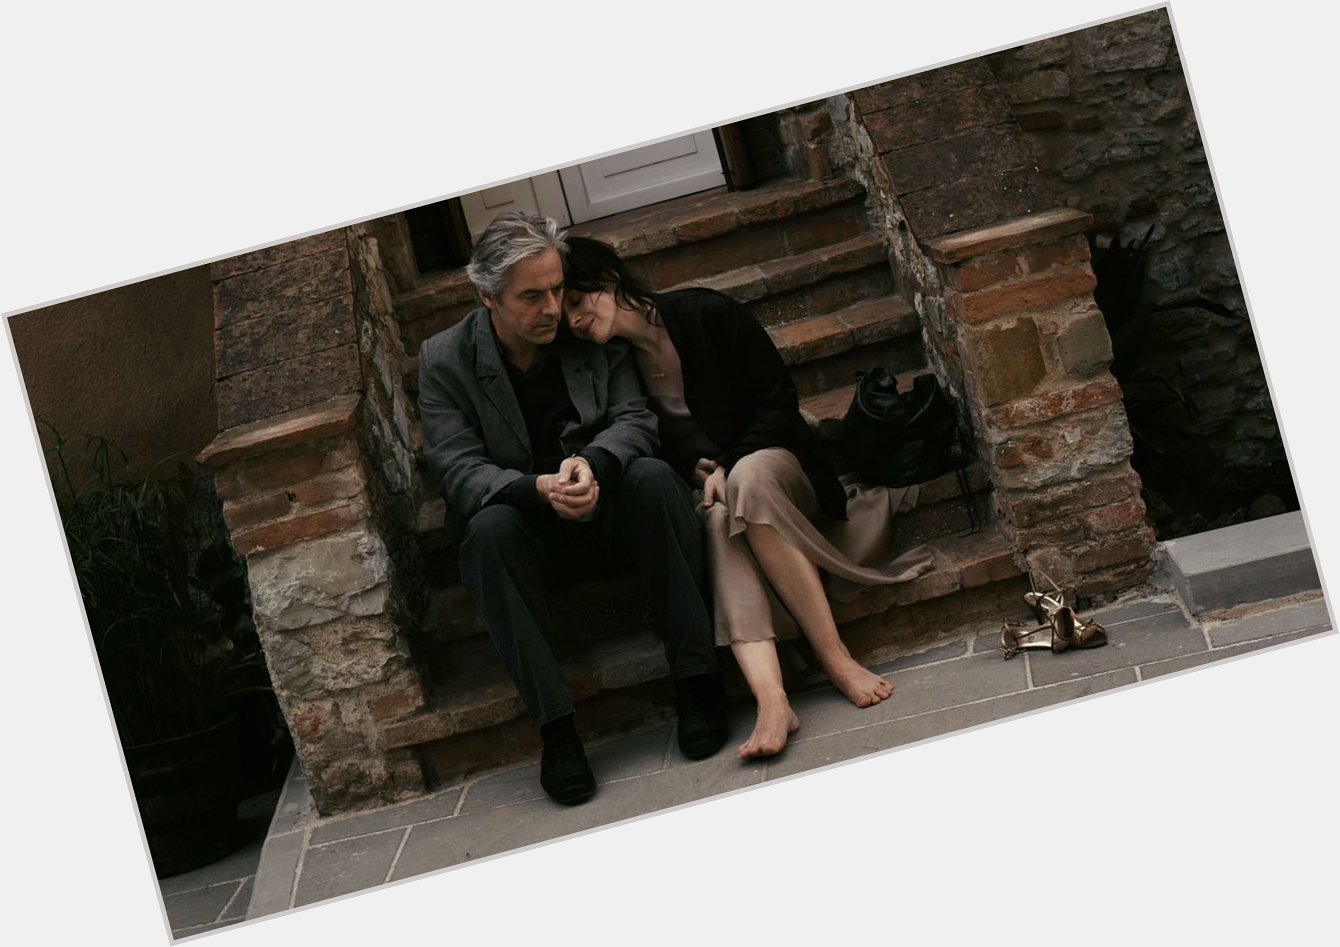 Happy birthday to the late, great Abbas Kiarostami. CERTIFIED COPY remains an all-time favorite movie. 